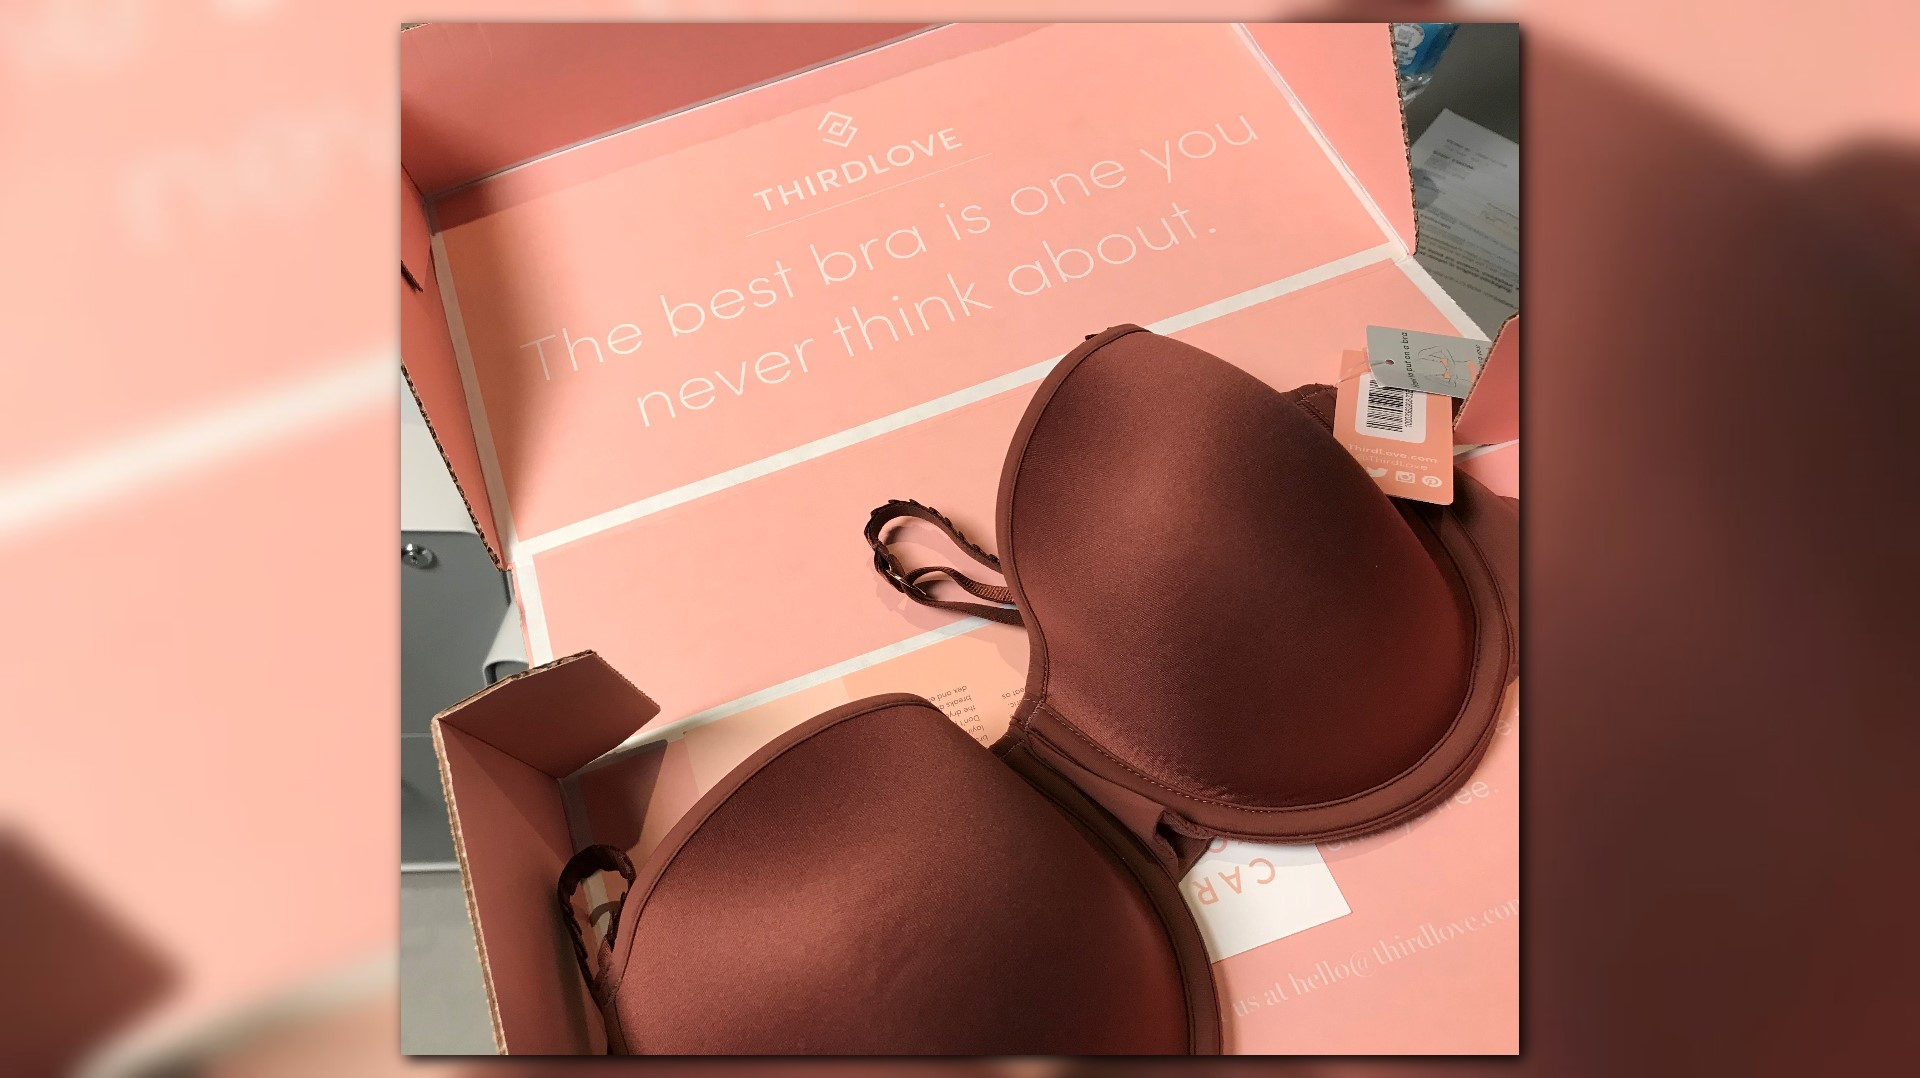 Our #1 bra is only $49 - Third Love